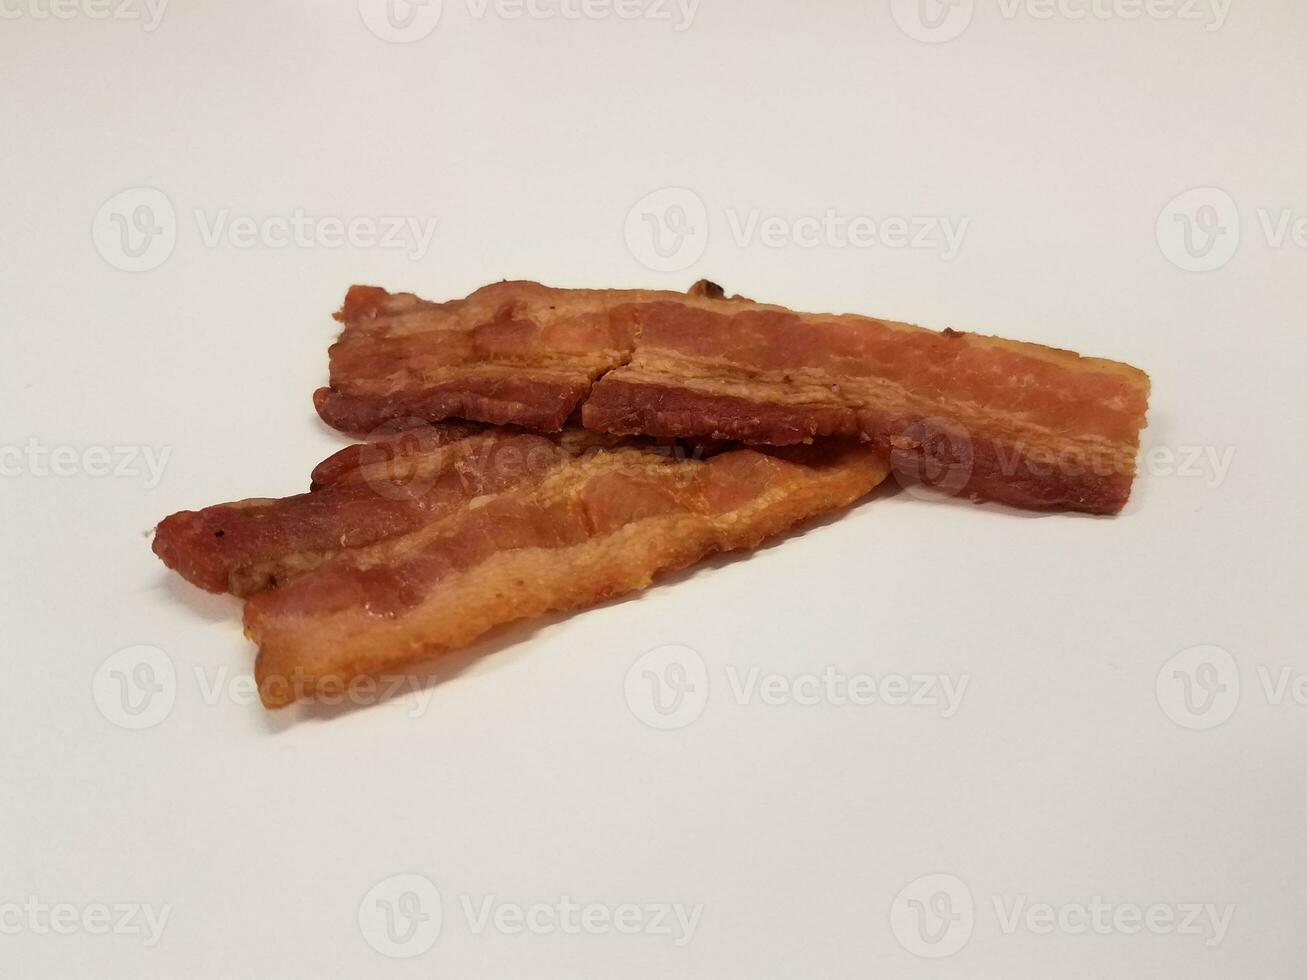 bacon strip or meat on white surface or table photo